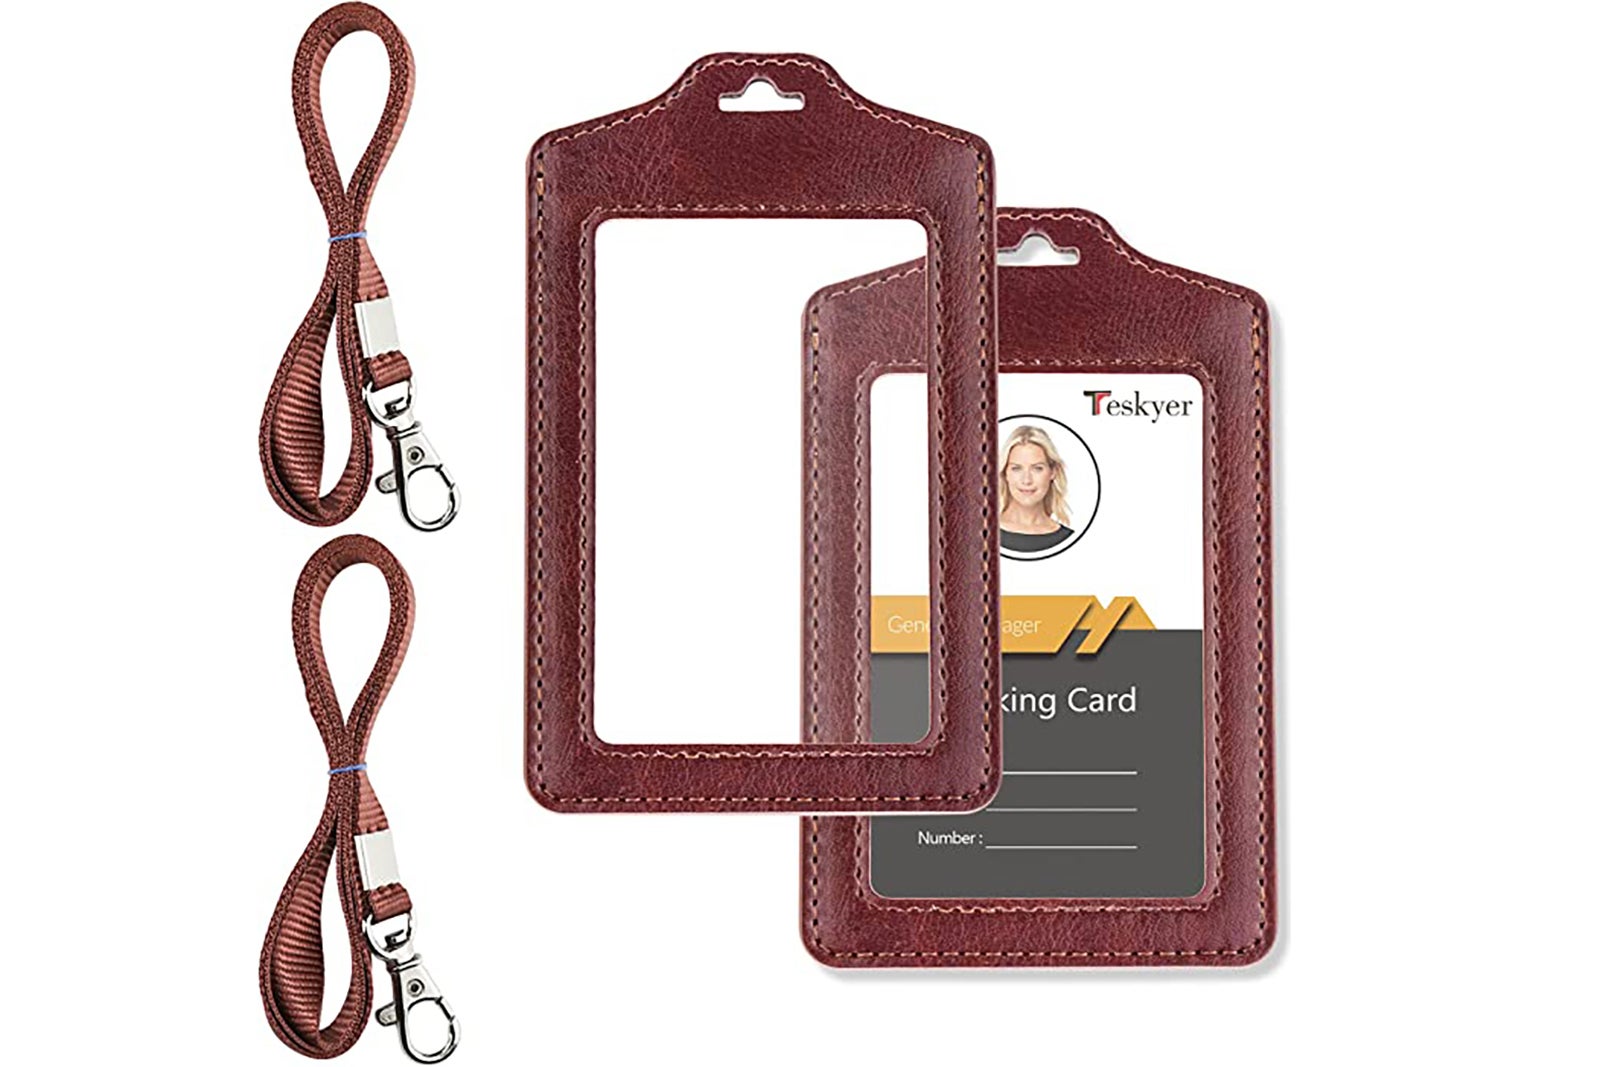 Teskyer 2 Pack of Double Sided Clear Badge Holder Amazon